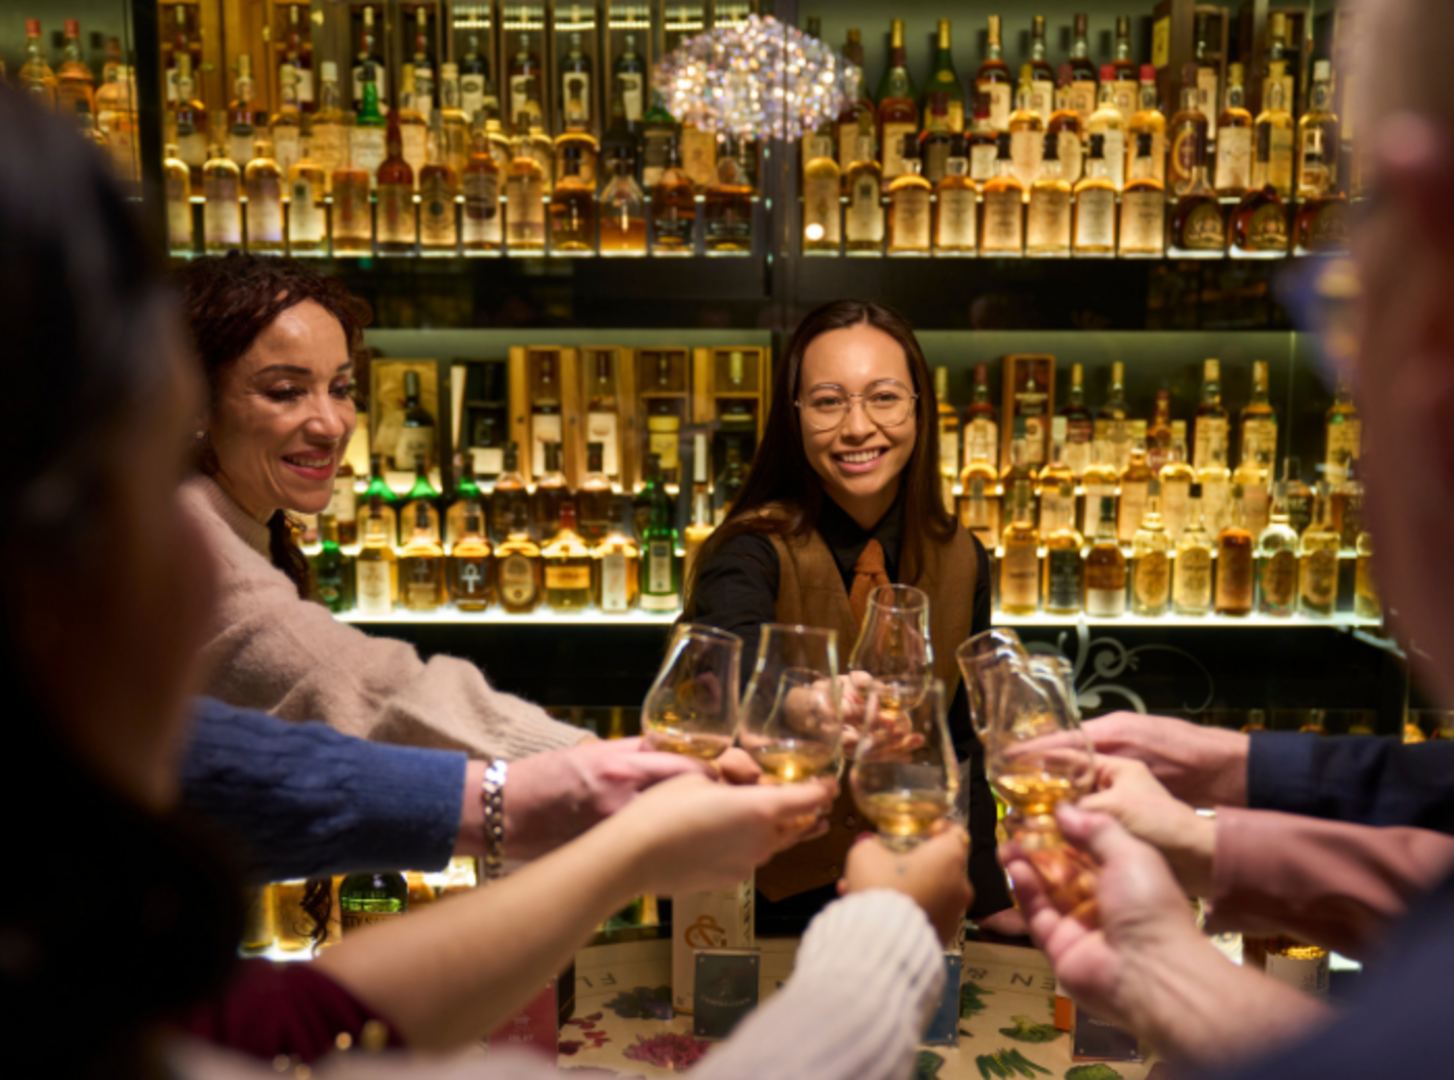 Tour guide and visitors within the whisky collection at The Scotch Whisky Experience,© The Scotch Whisky Experience